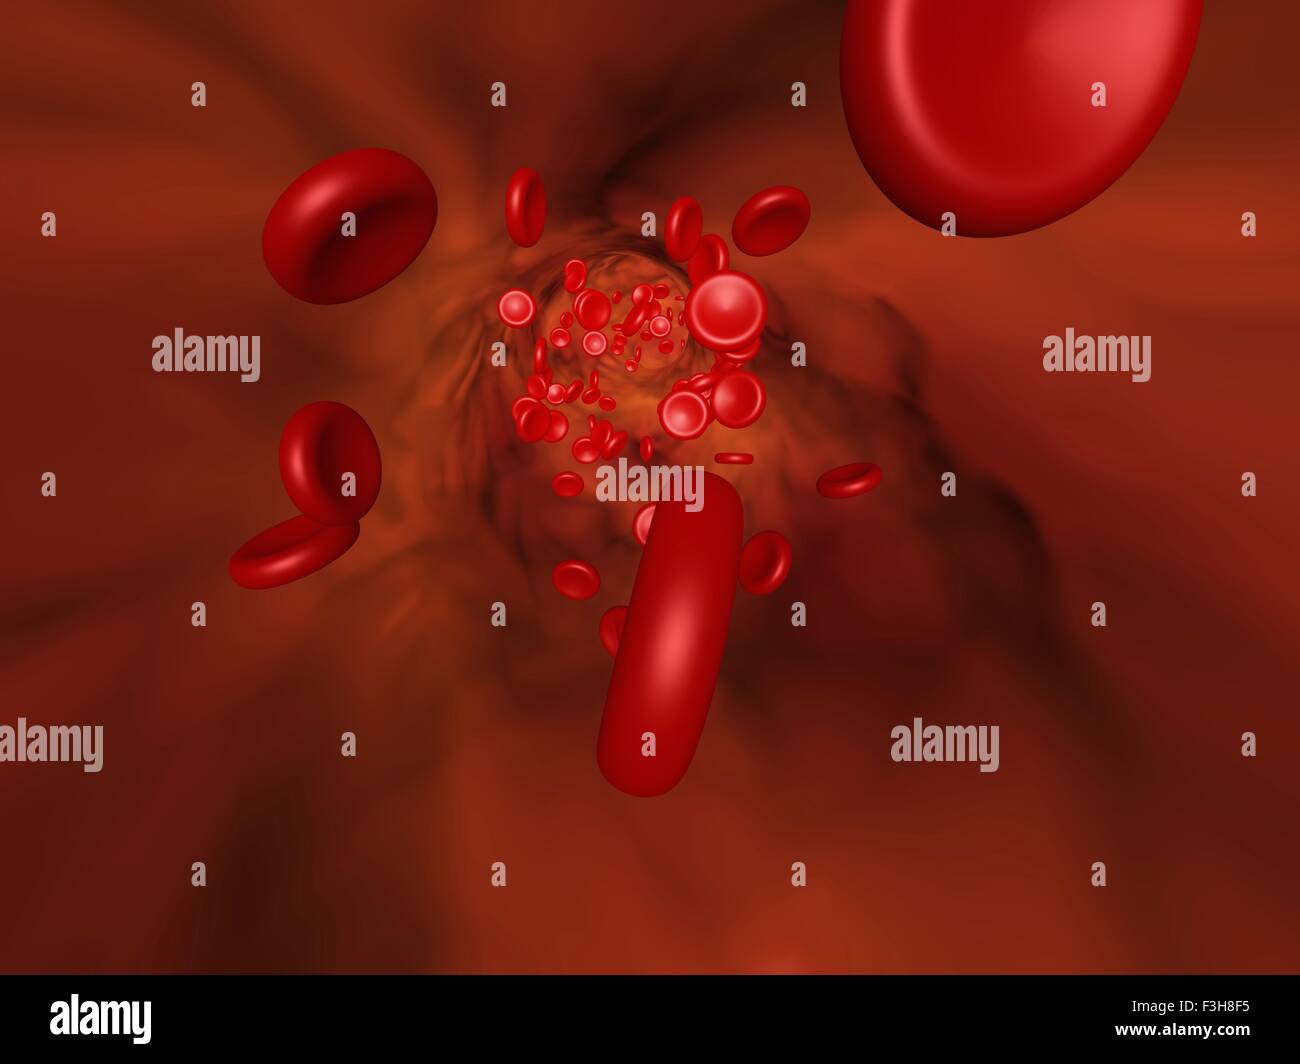 3D illustration showing the red blood cell flow in a vessel Stock Photo